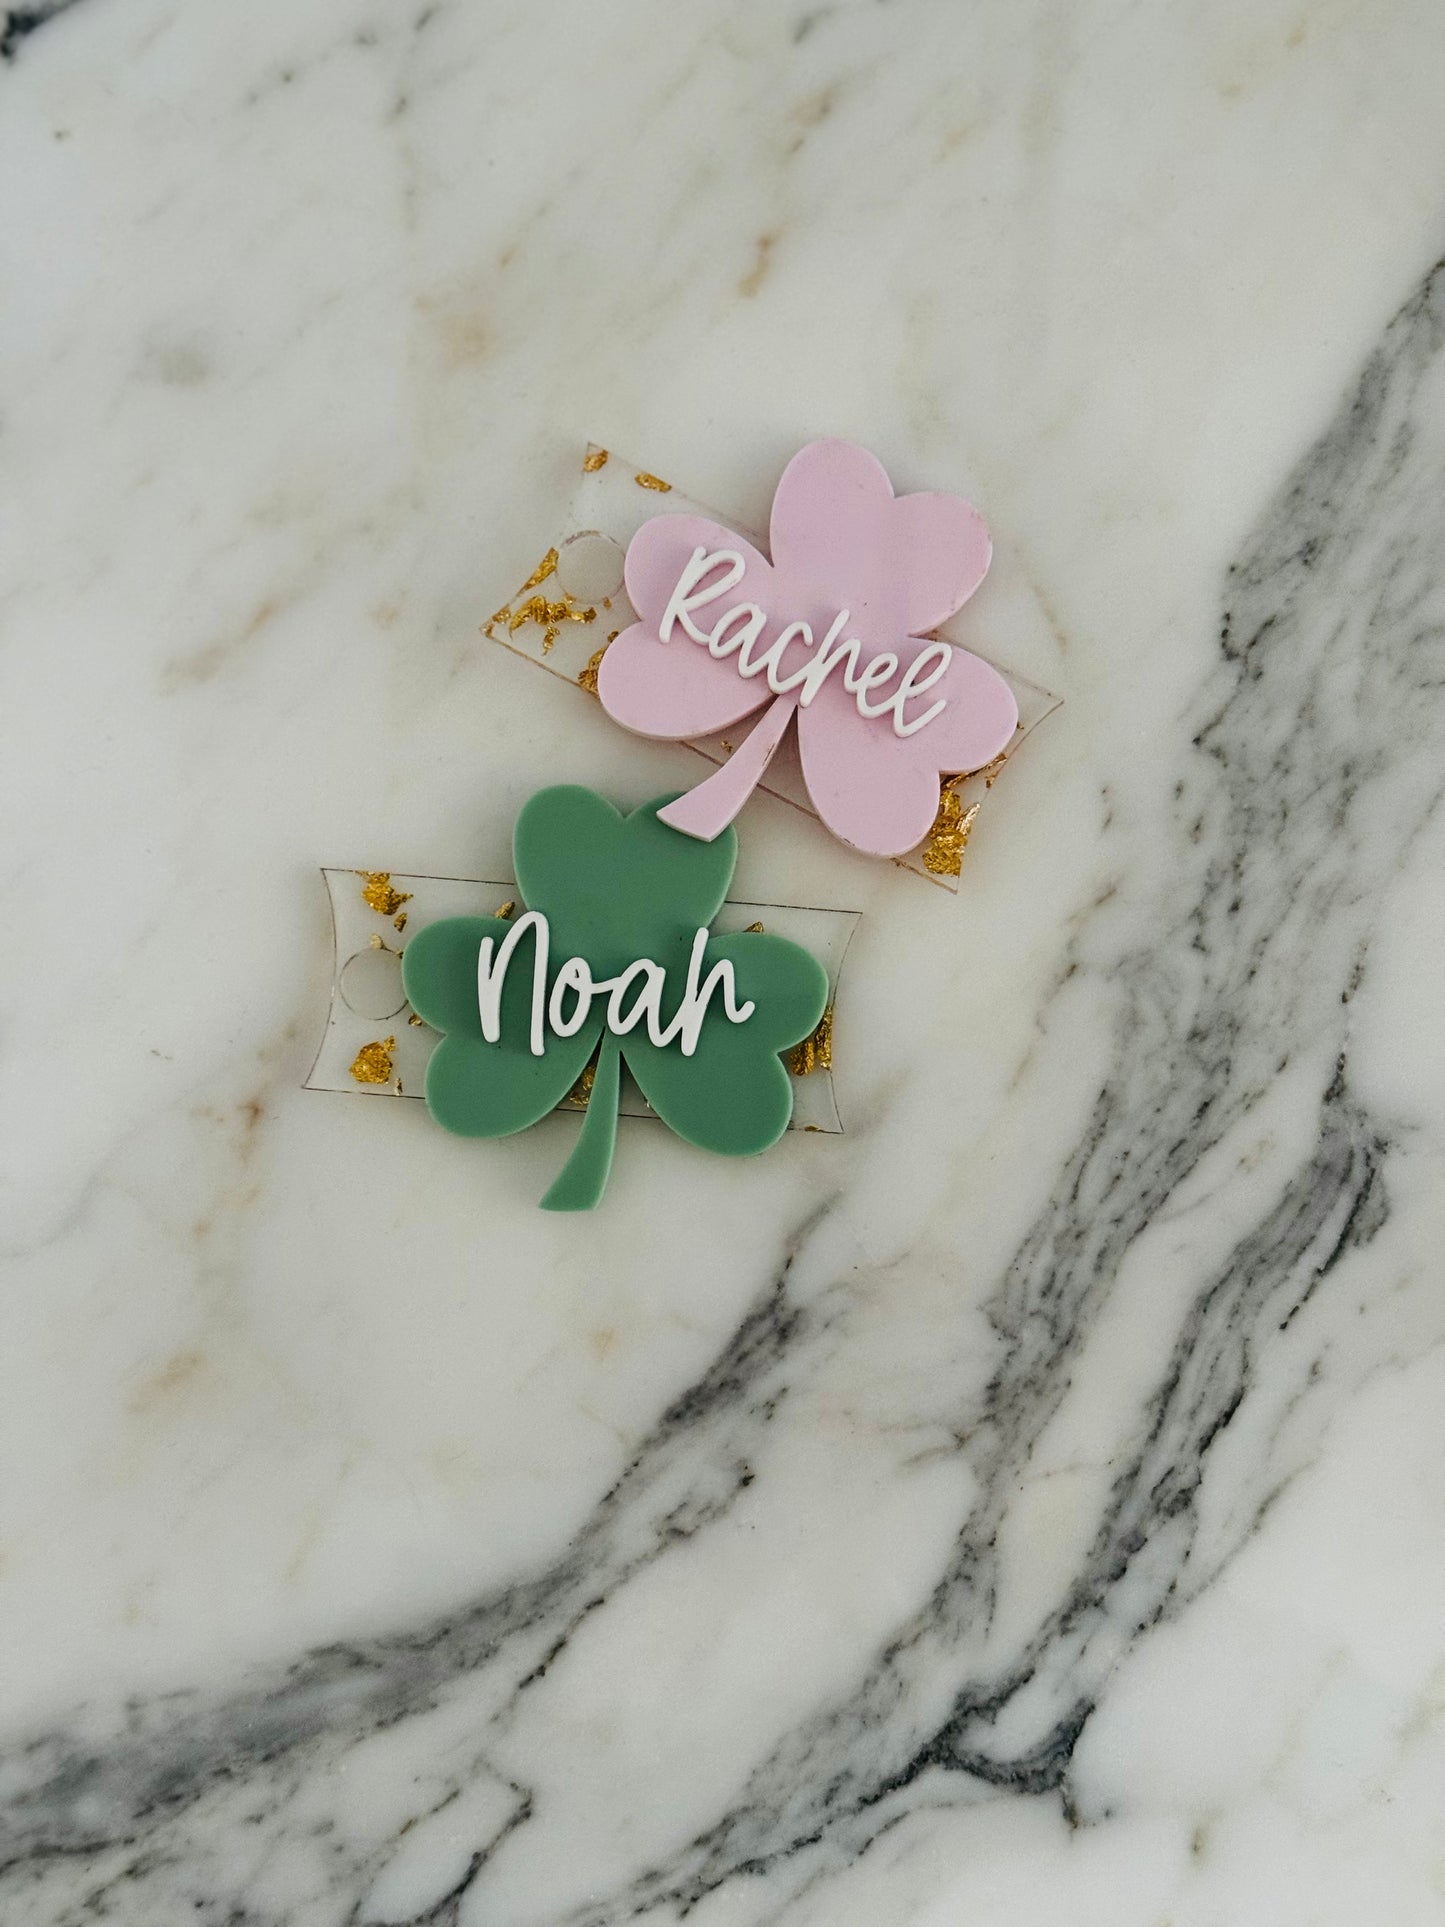 Clover stanley name tag